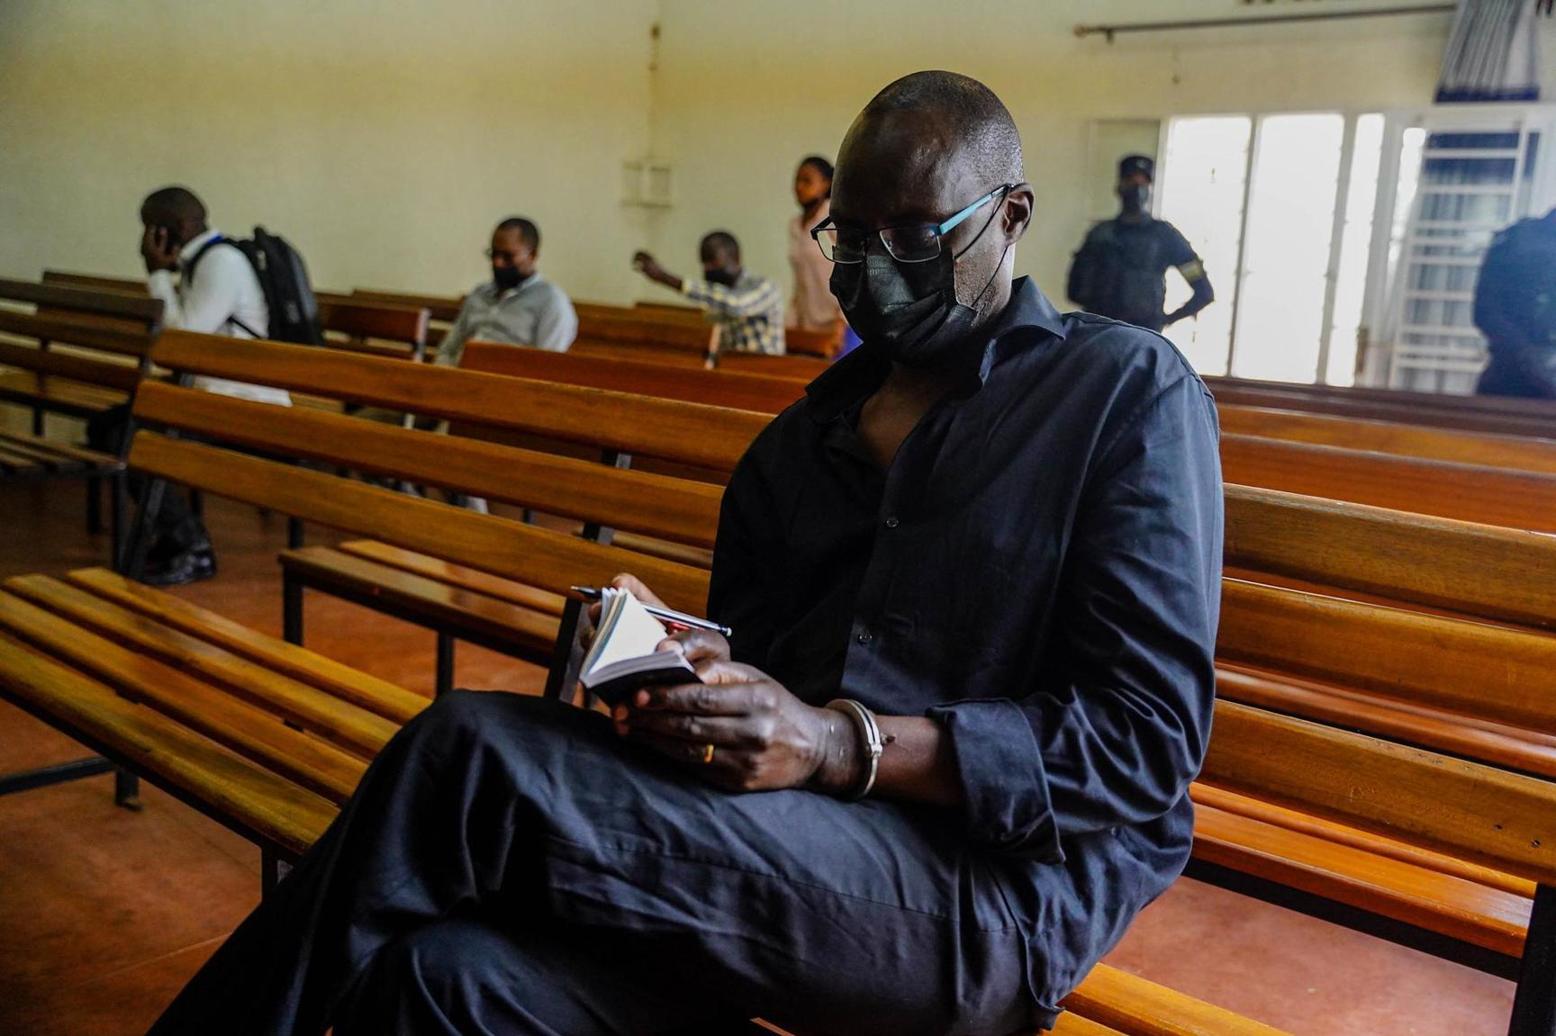 Micomyiza appears in court, denies Genocide crimes